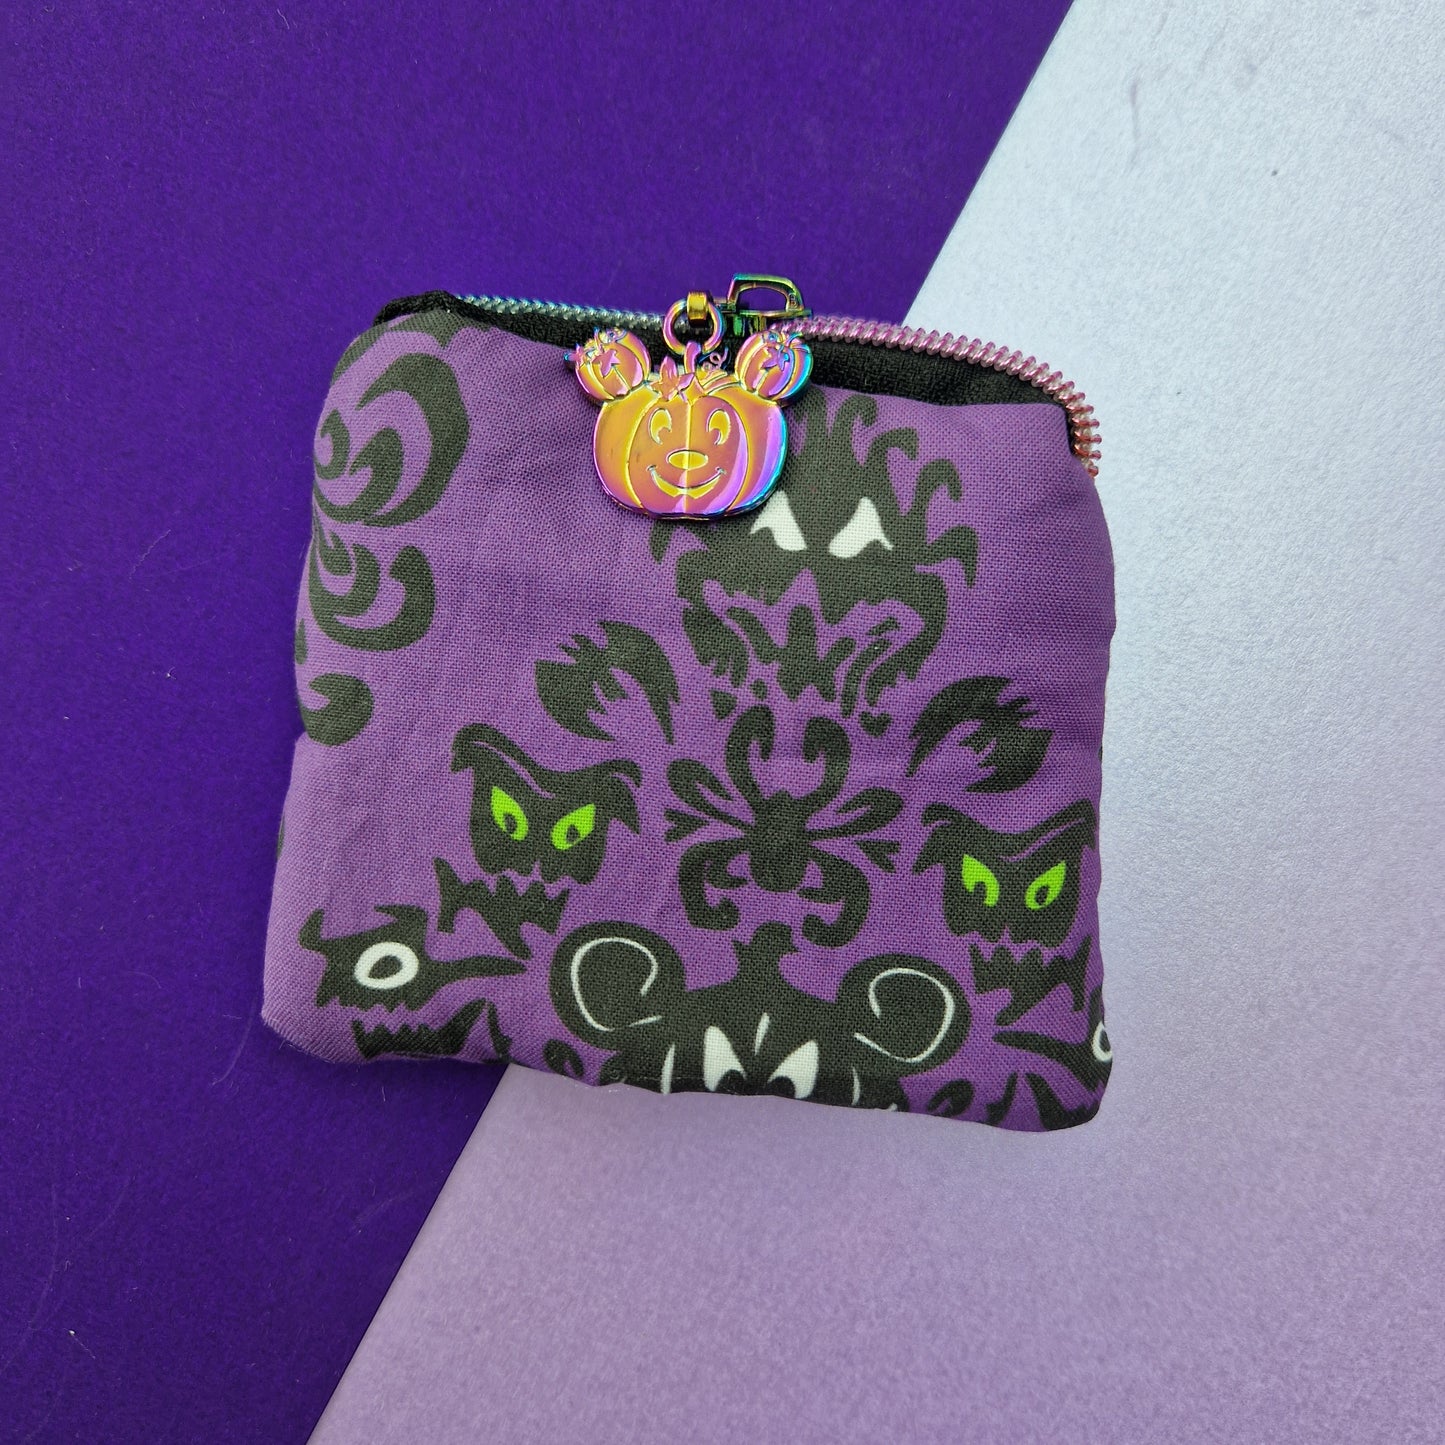 Haunted Mansion coin pouch cosmetic bag with pumpkin mouse zipper pull